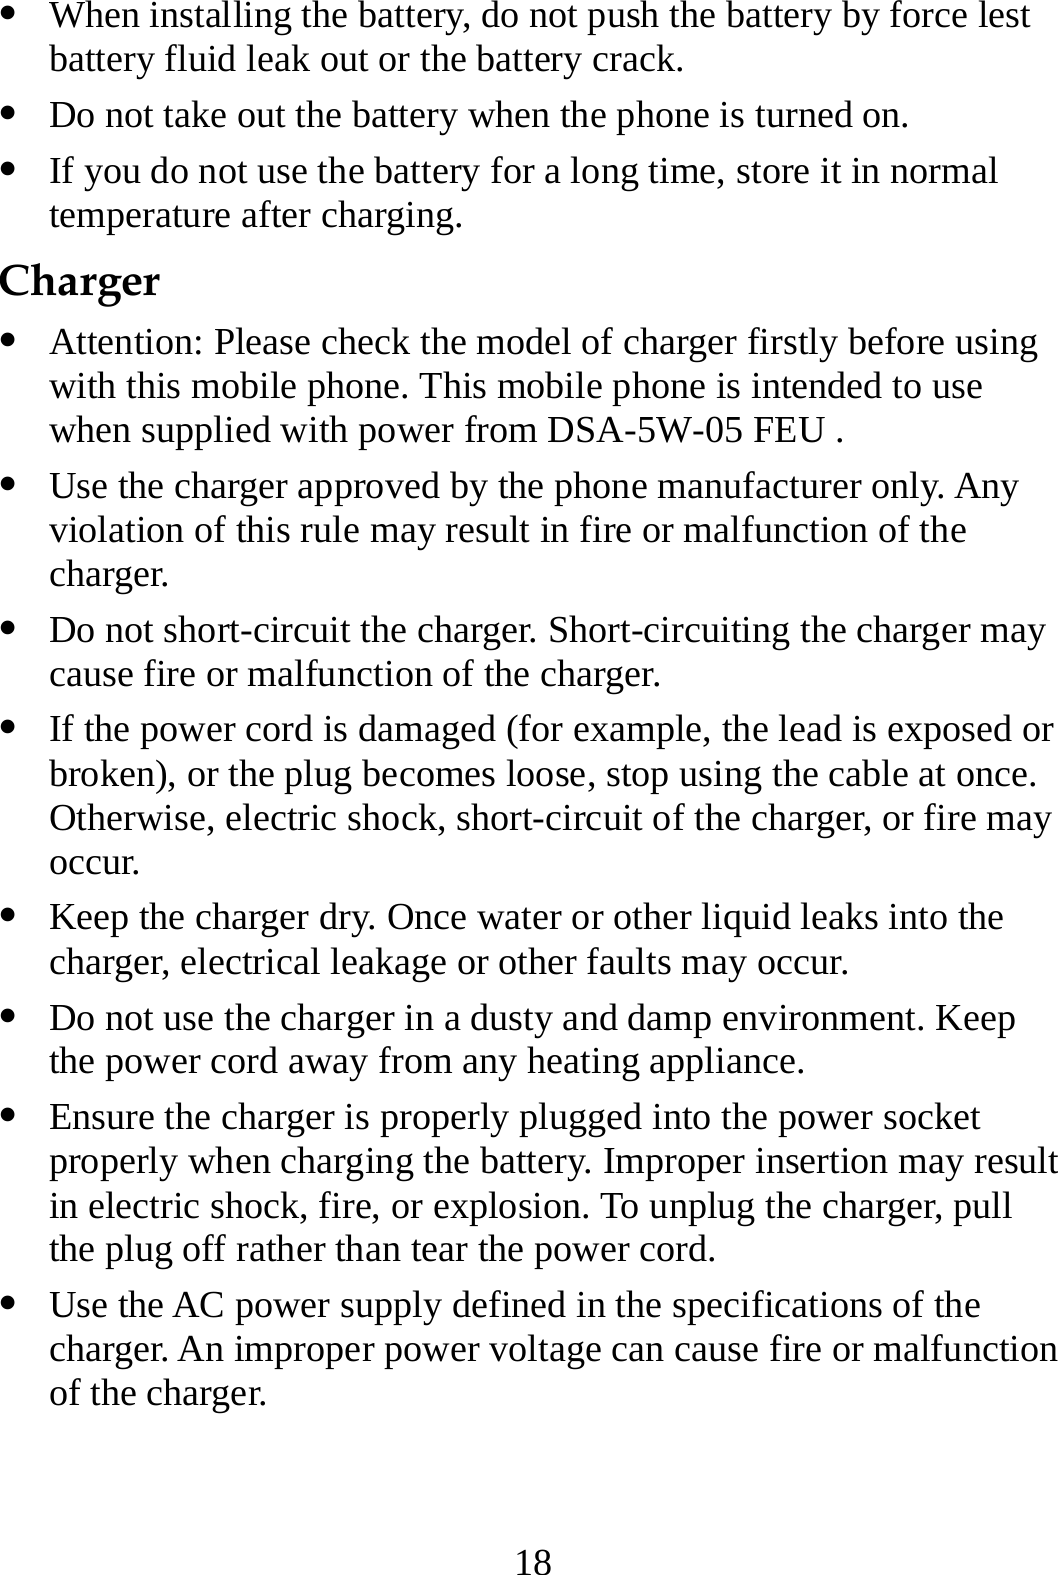 18 z When installing the battery, do not push the battery by force lest battery fluid leak out or the battery crack. z Do not take out the battery when the phone is turned on. z If you do not use the battery for a long time, store it in normal temperature after charging. Charger z Attention: Please check the model of charger firstly before using with this mobile phone. This mobile phone is intended to use when supplied with power from DSA-5W-05 FEU . z Use the charger approved by the phone manufacturer only. Any violation of this rule may result in fire or malfunction of the charger. z Do not short-circuit the charger. Short-circuiting the charger may cause fire or malfunction of the charger. z If the power cord is damaged (for example, the lead is exposed or broken), or the plug becomes loose, stop using the cable at once. Otherwise, electric shock, short-circuit of the charger, or fire may occur. z Keep the charger dry. Once water or other liquid leaks into the charger, electrical leakage or other faults may occur. z Do not use the charger in a dusty and damp environment. Keep the power cord away from any heating appliance. z Ensure the charger is properly plugged into the power socket properly when charging the battery. Improper insertion may result in electric shock, fire, or explosion. To unplug the charger, pull the plug off rather than tear the power cord. z Use the AC power supply defined in the specifications of the charger. An improper power voltage can cause fire or malfunction of the charger. 